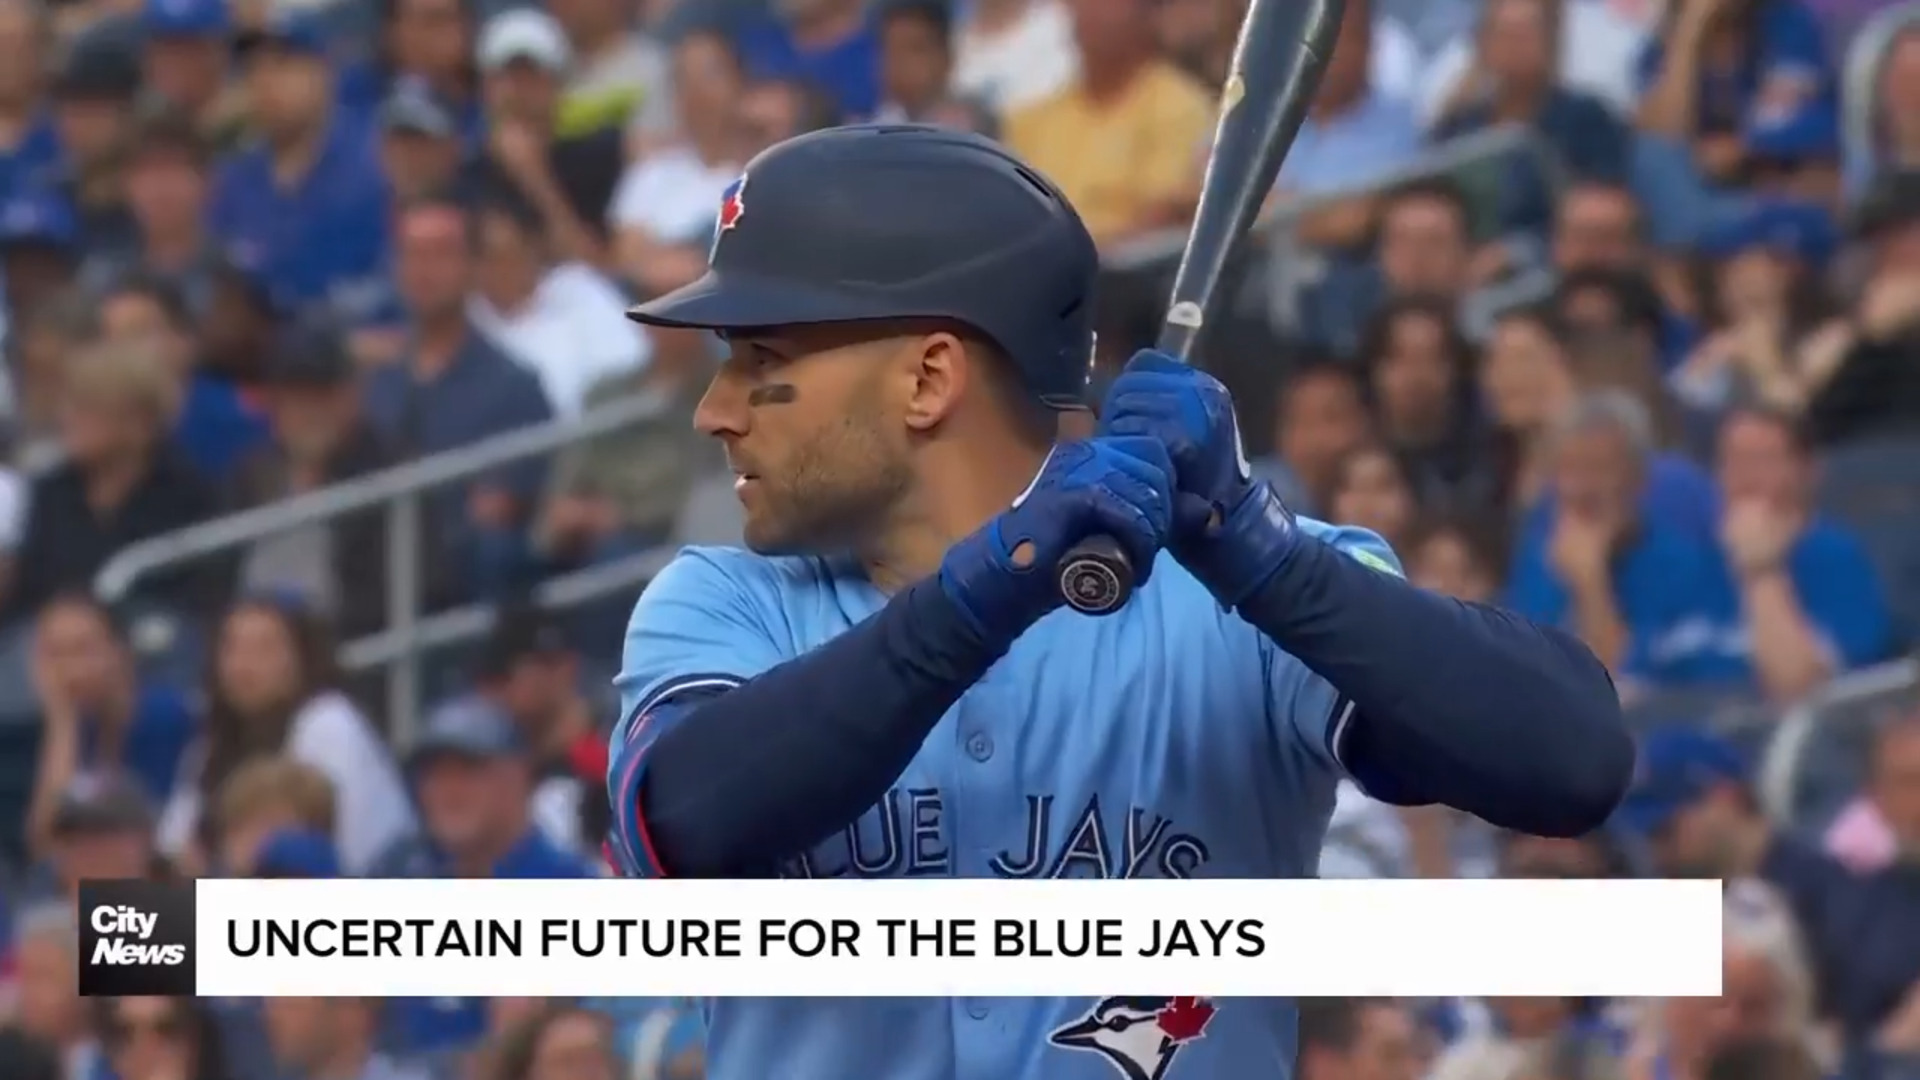 What's next for Kiermaier and the Blue Jays?